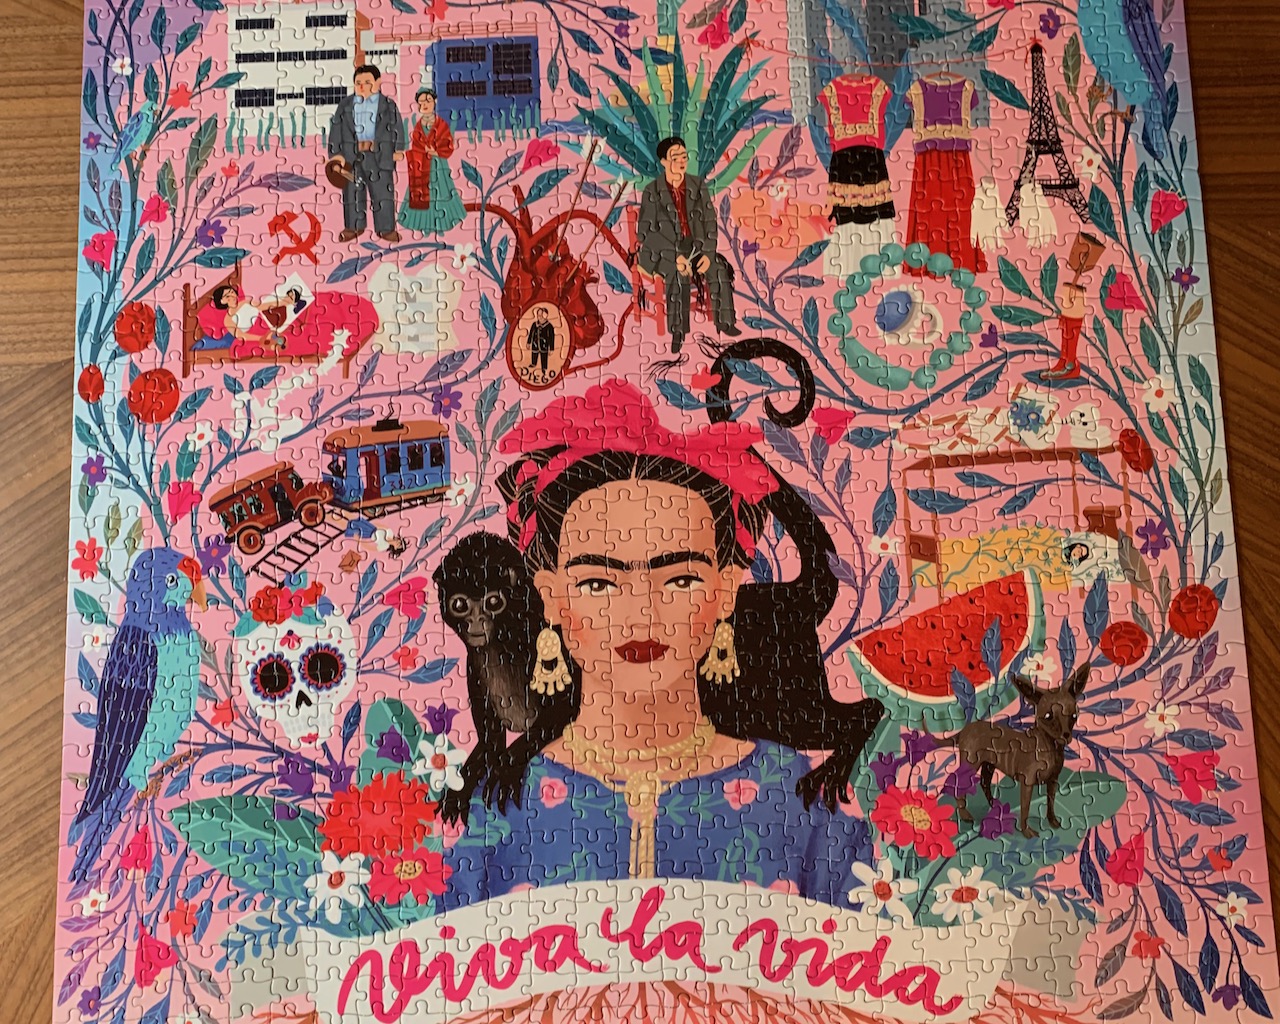 Frida Kahlo puzzle completed.